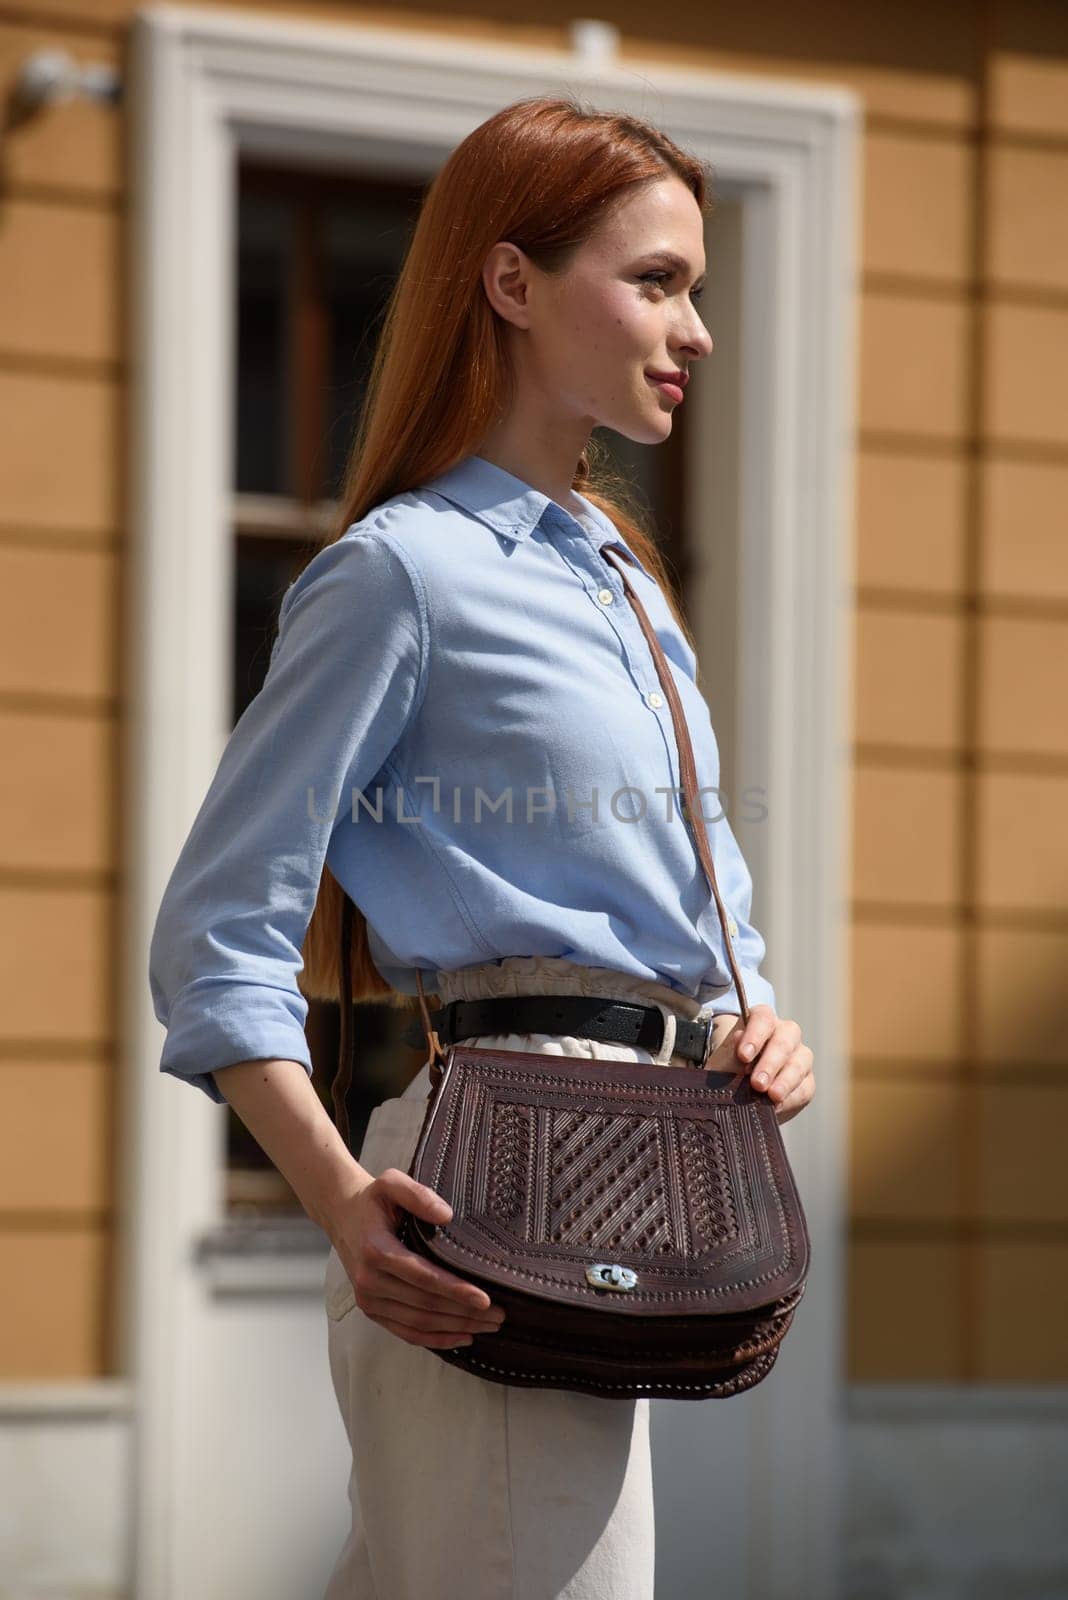 small brown women's leather bag with a carved pattern. street photo